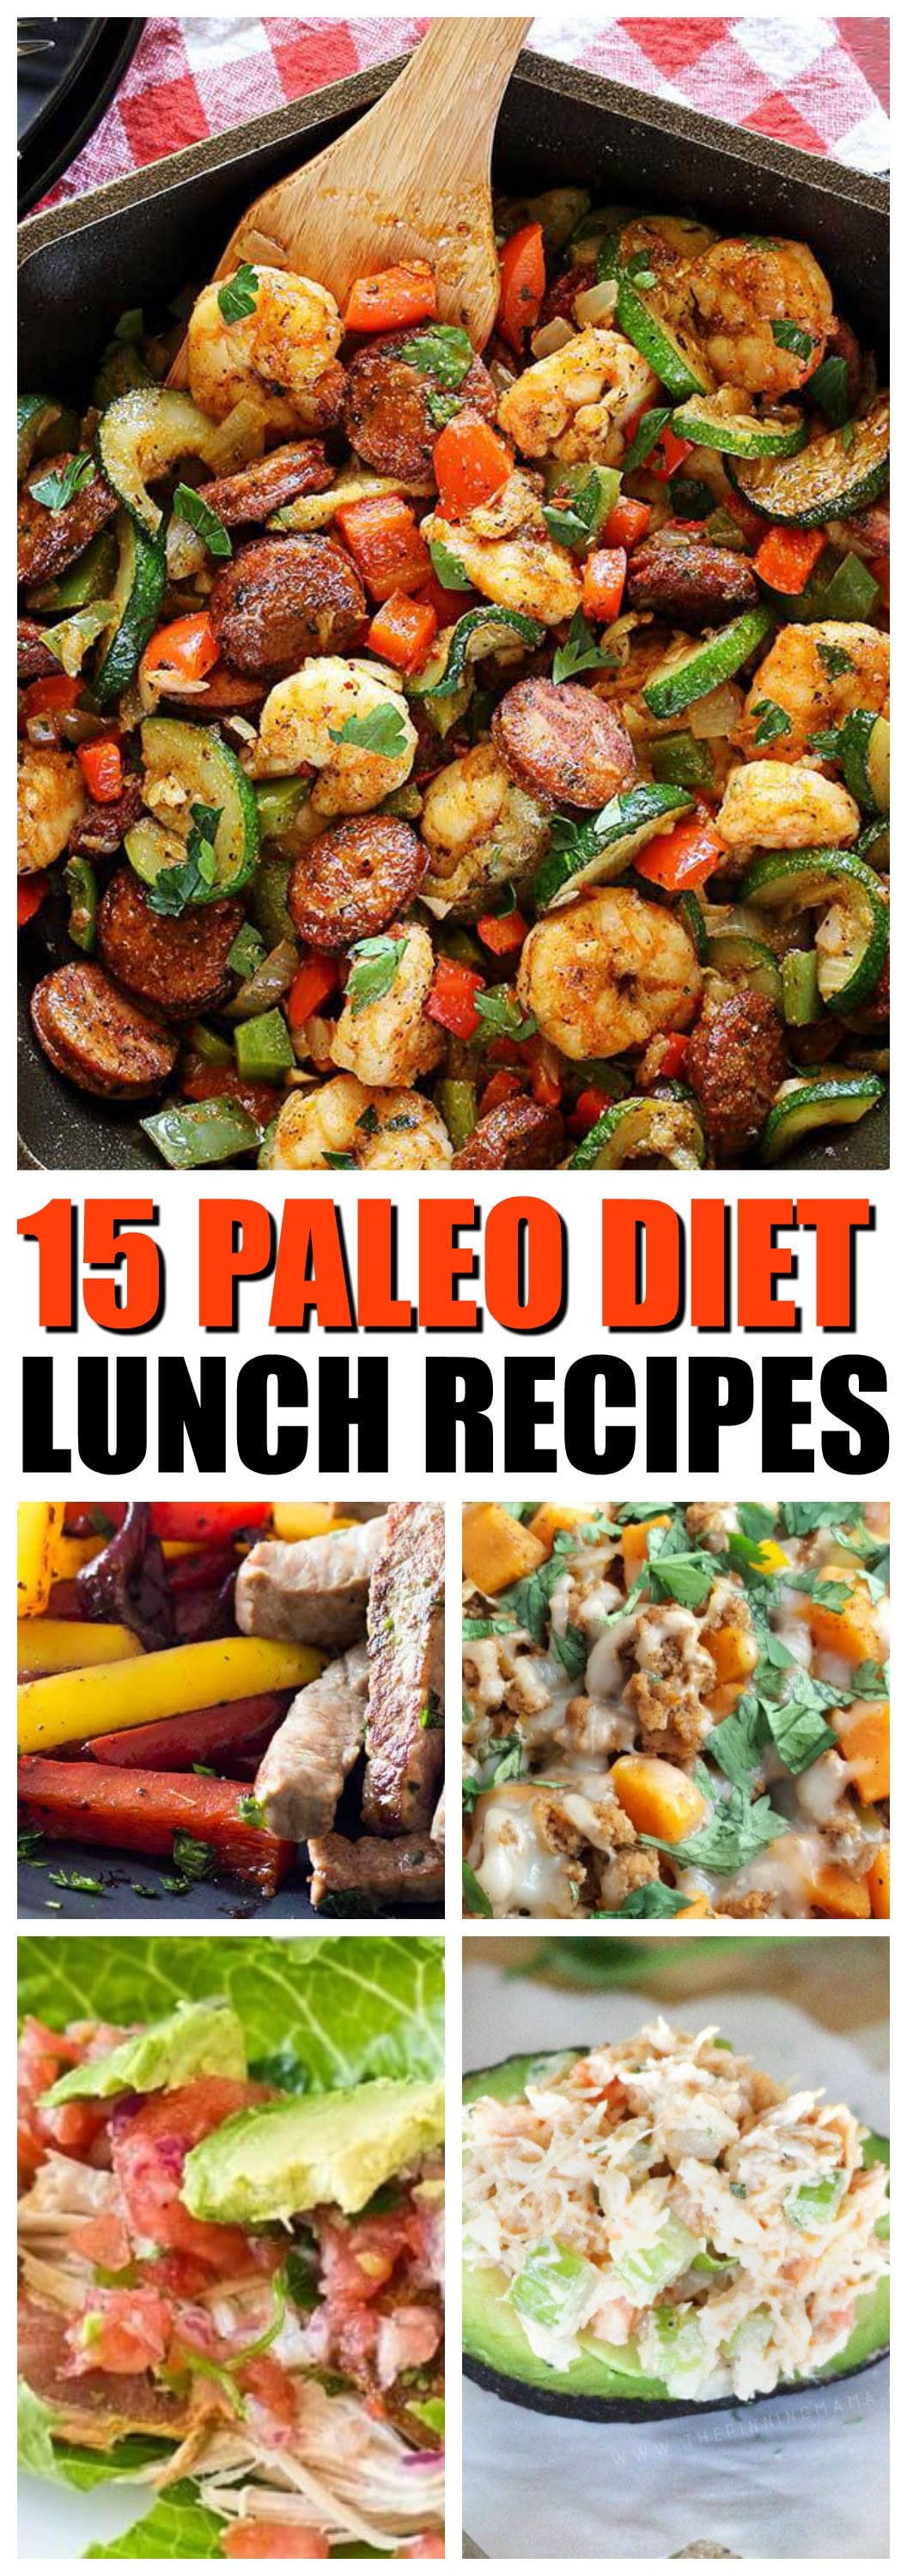 Paleo Diet Lunch Ideas and Recipes to help beginners get started, salads, wraps, mexican and more all paleo approved